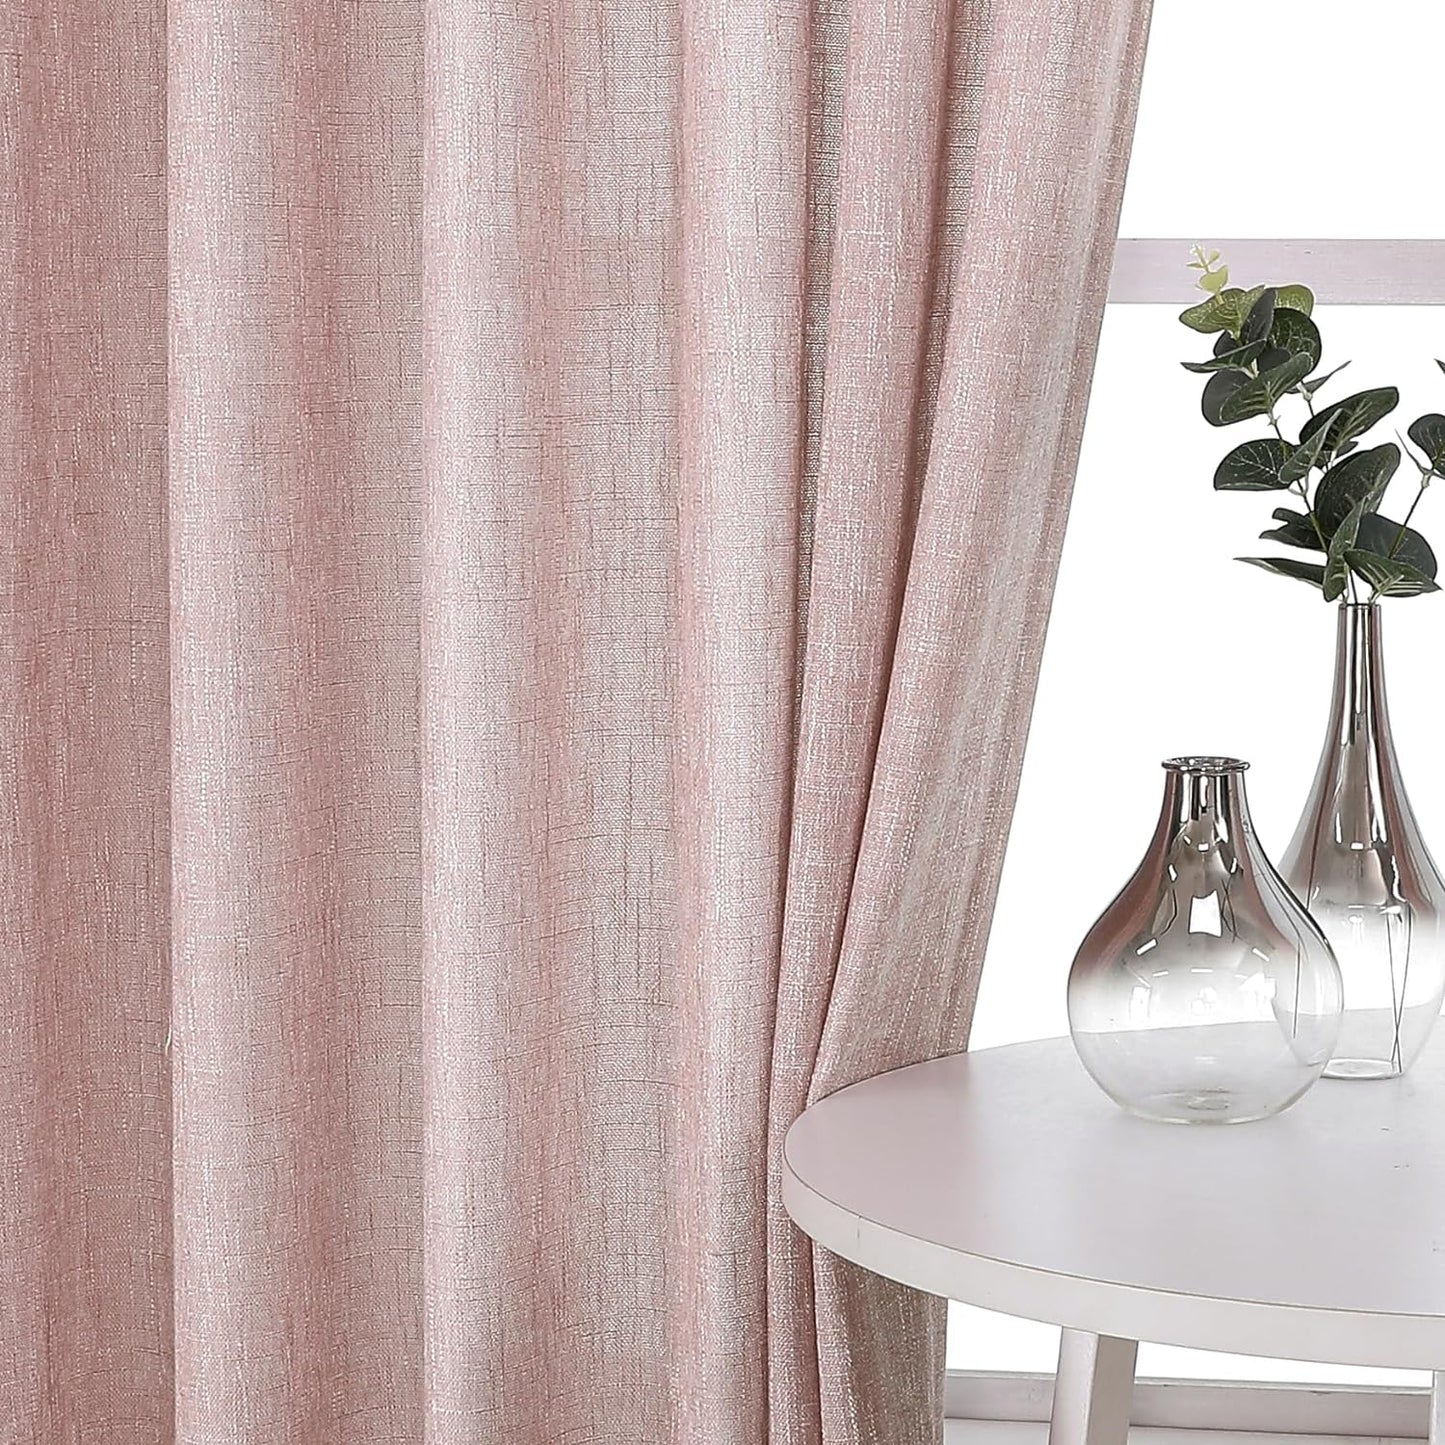 Vision Home Natural Pinch Pleated Semi Sheer Curtains Textured Linen Blended Light Filtering Window Curtains 84 Inch for Living Room Bedroom Pinch Pleat Drapes with Hooks 2 Panels 42" Wx84 L  Vision Home Pink/Pinch 40"X108"X2 